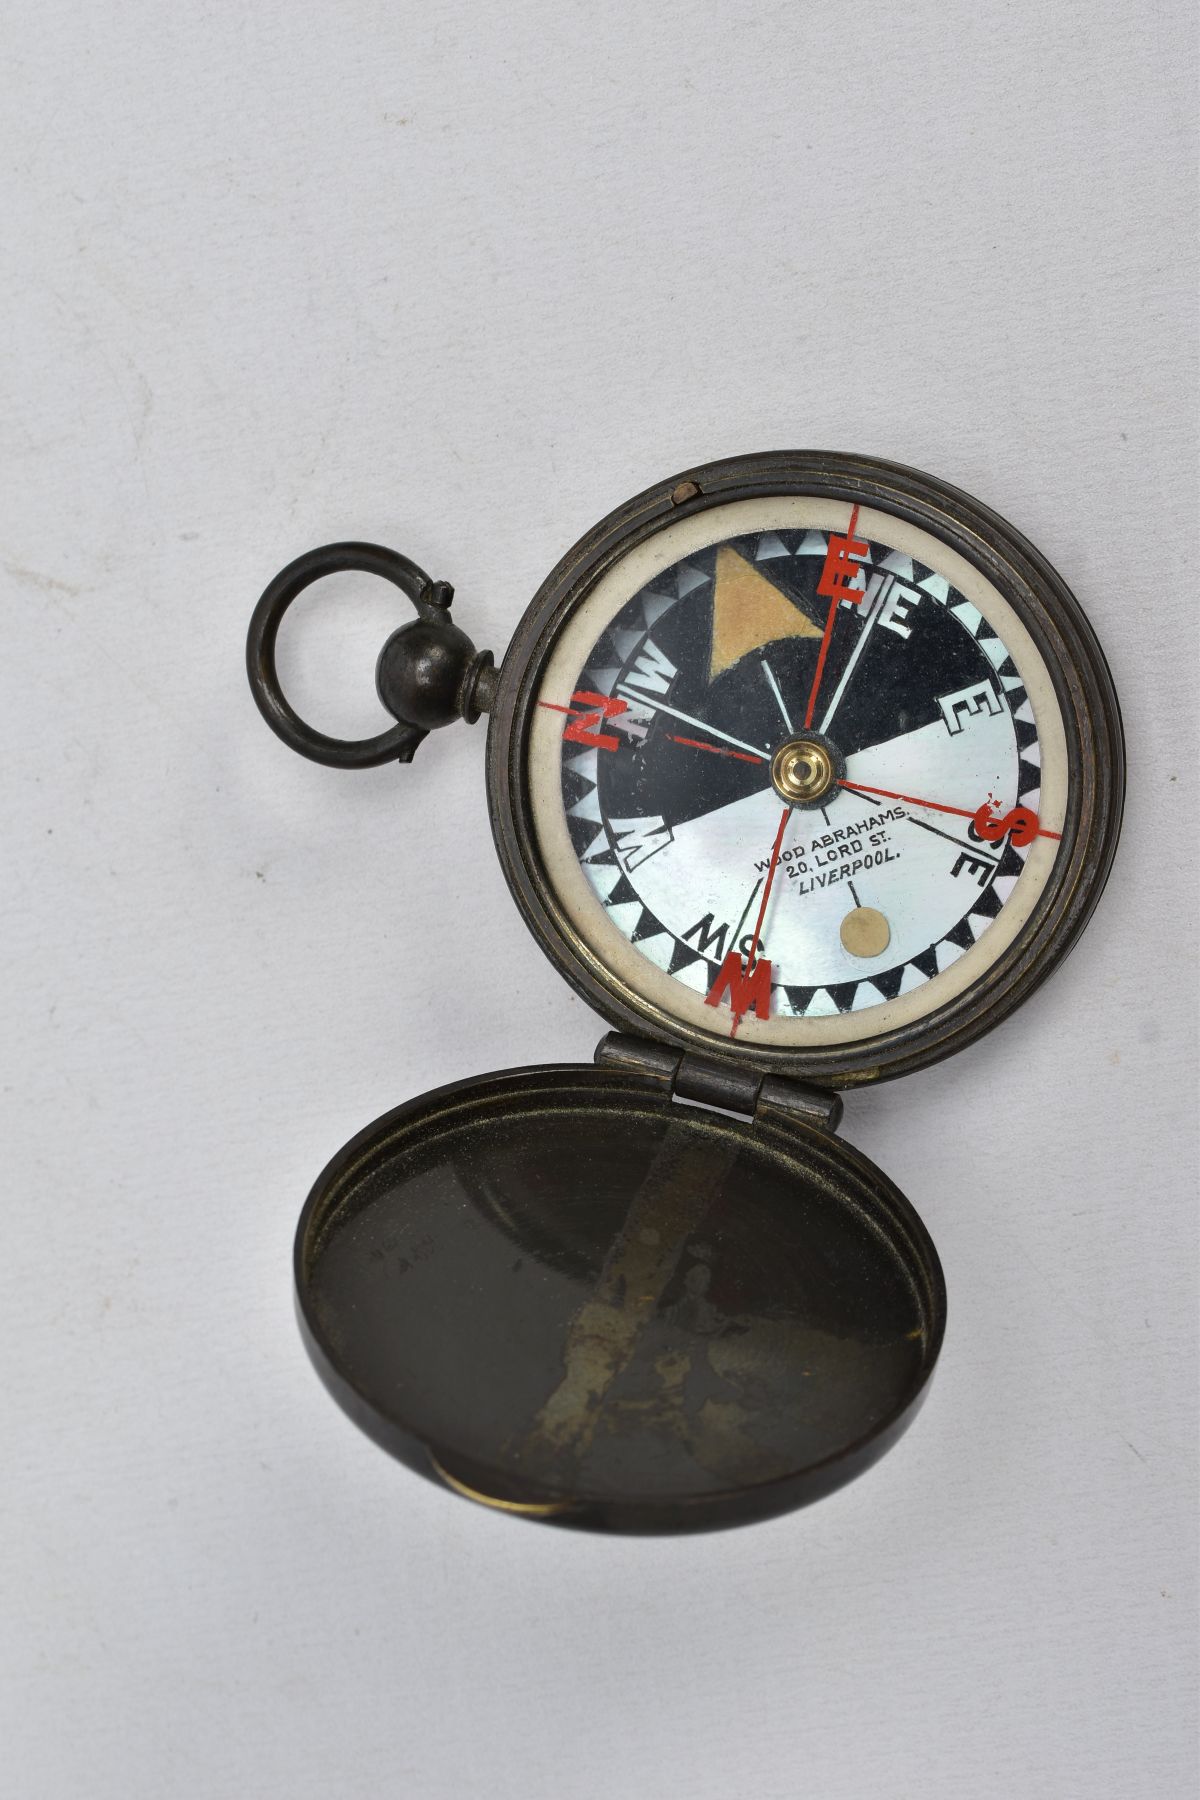 A 'WOOD ABRAHAMS' COMPASS, base metal compass, round mother of pearl dial, signed 'Wood Abrahams - Image 4 of 5